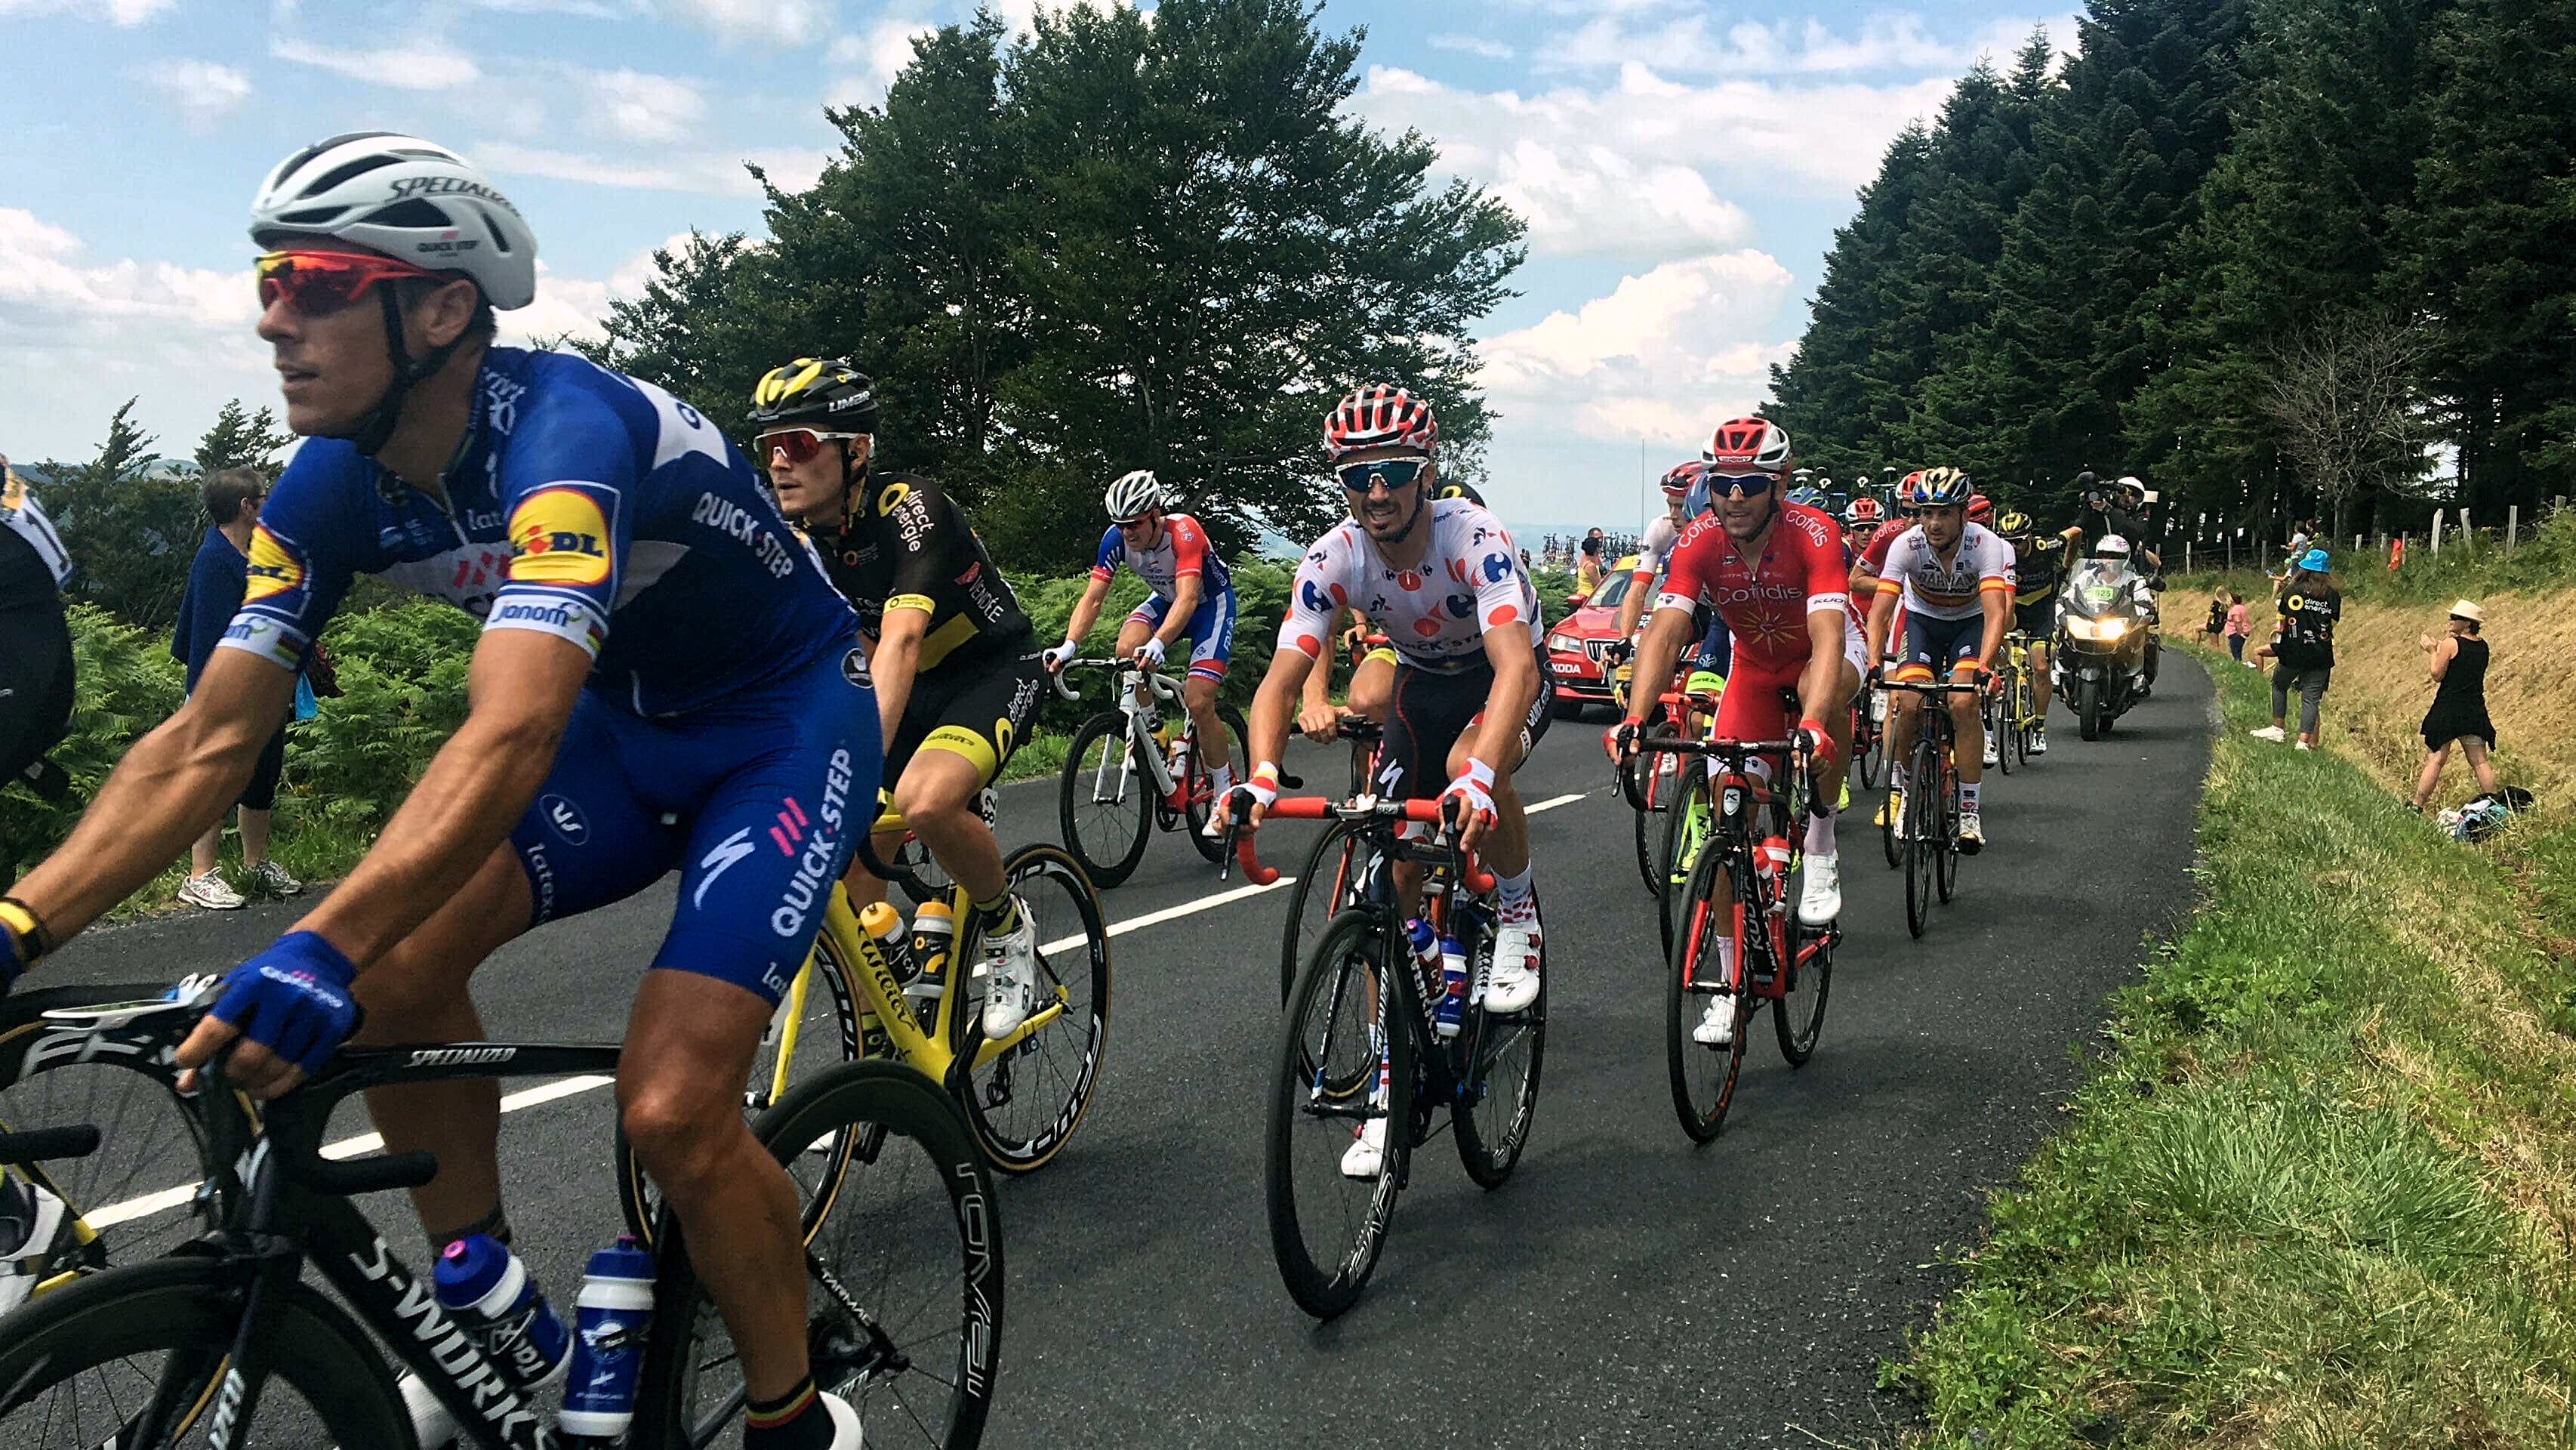 The Psychological Meaning of the Tour de France